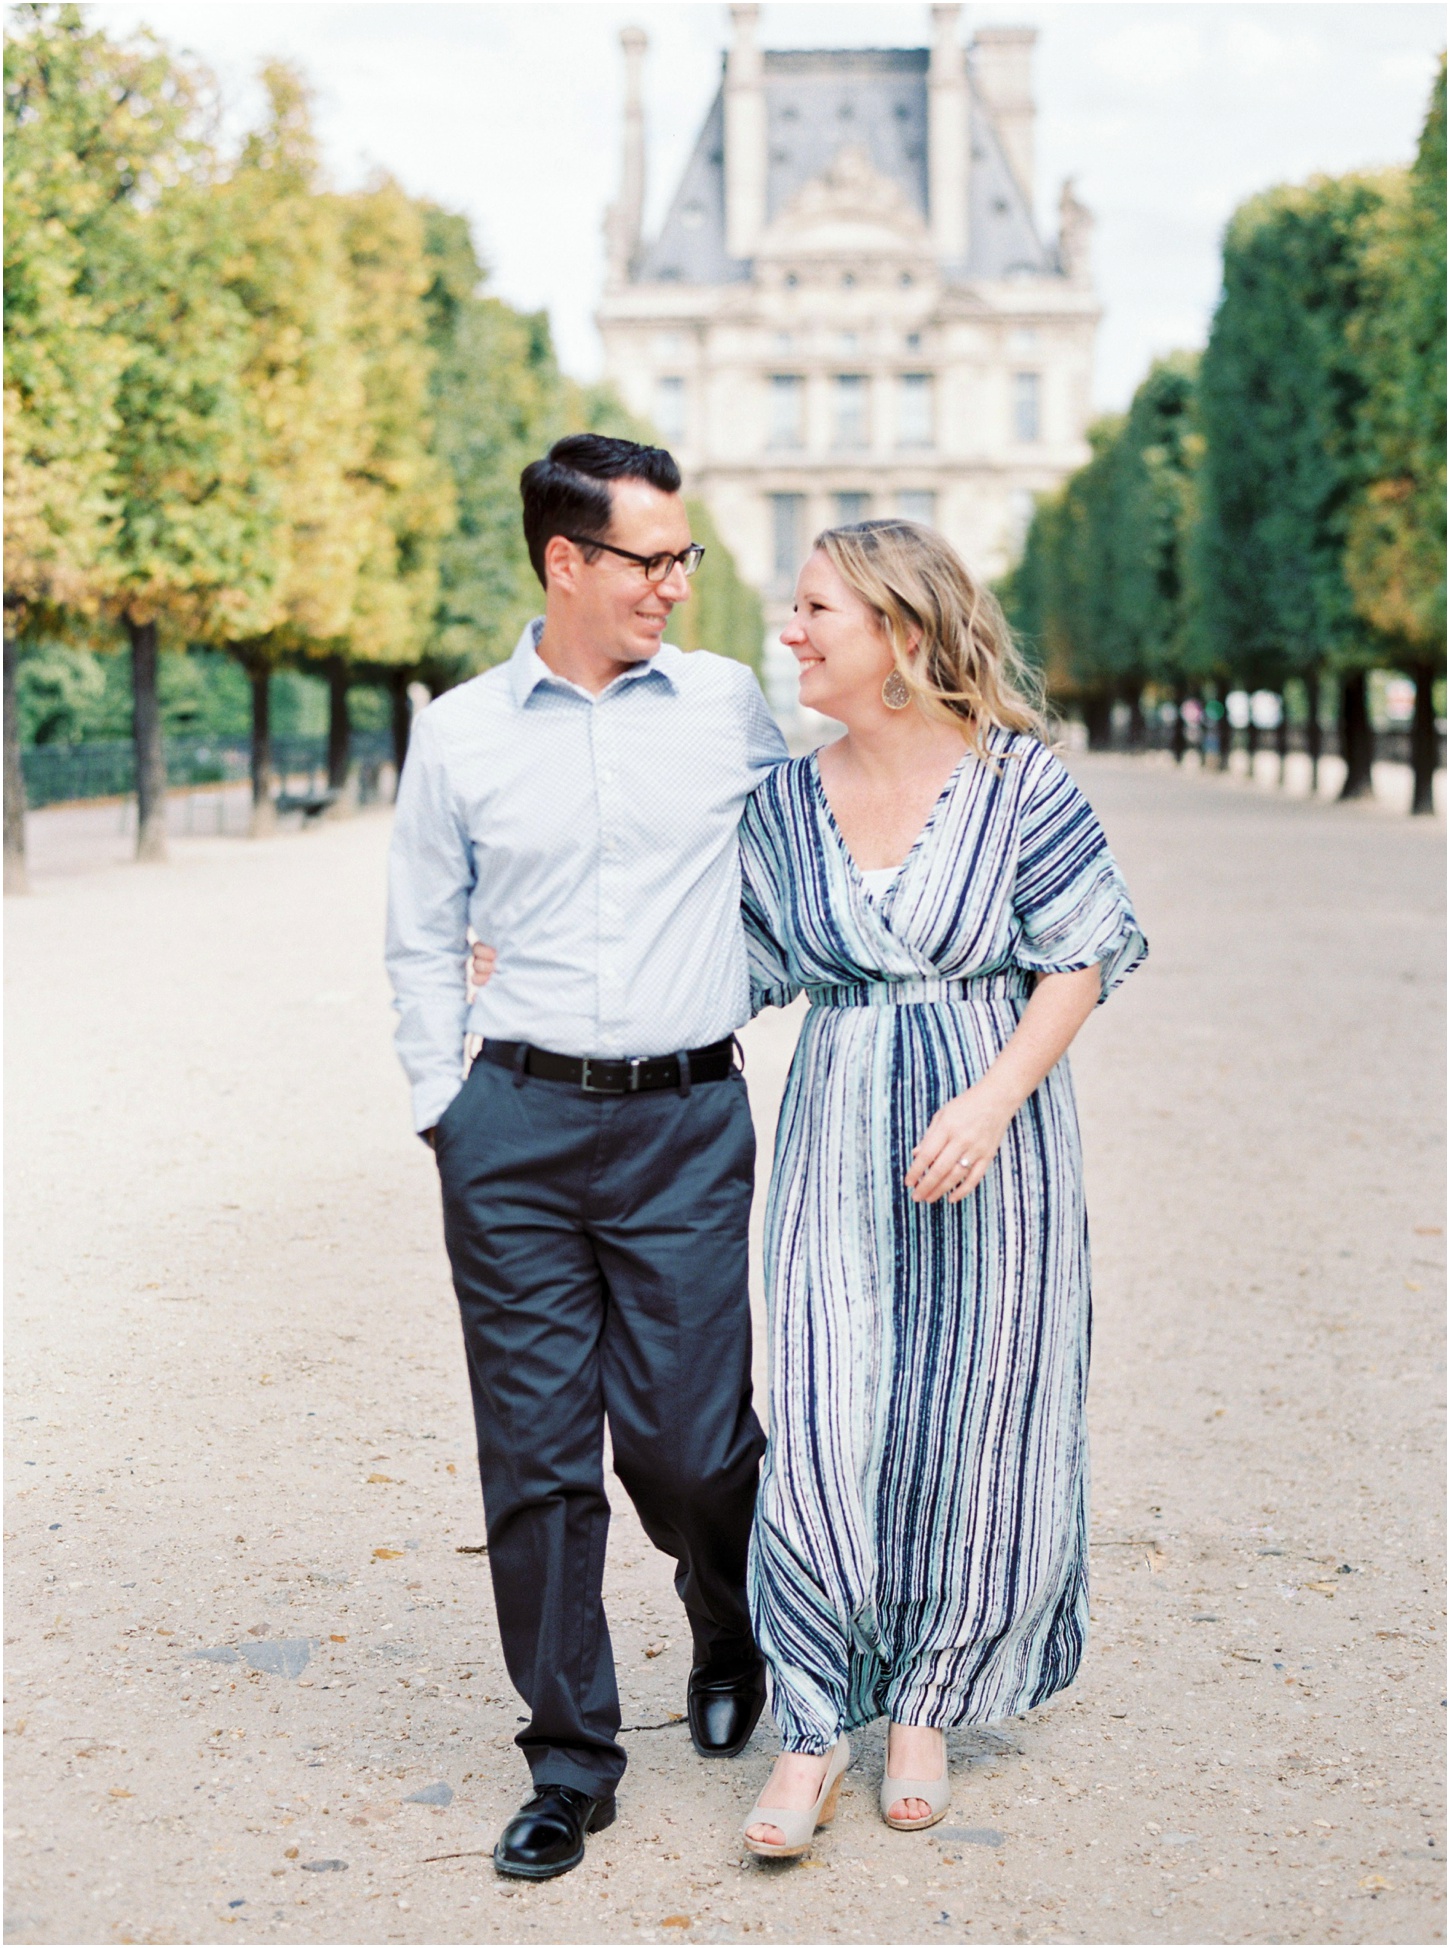 Jardin de Tuileries - nothing beats the stunning rows of trees, quiet outdoor cafes, or architectural backdrops for your romantic photo shoot in Paris!